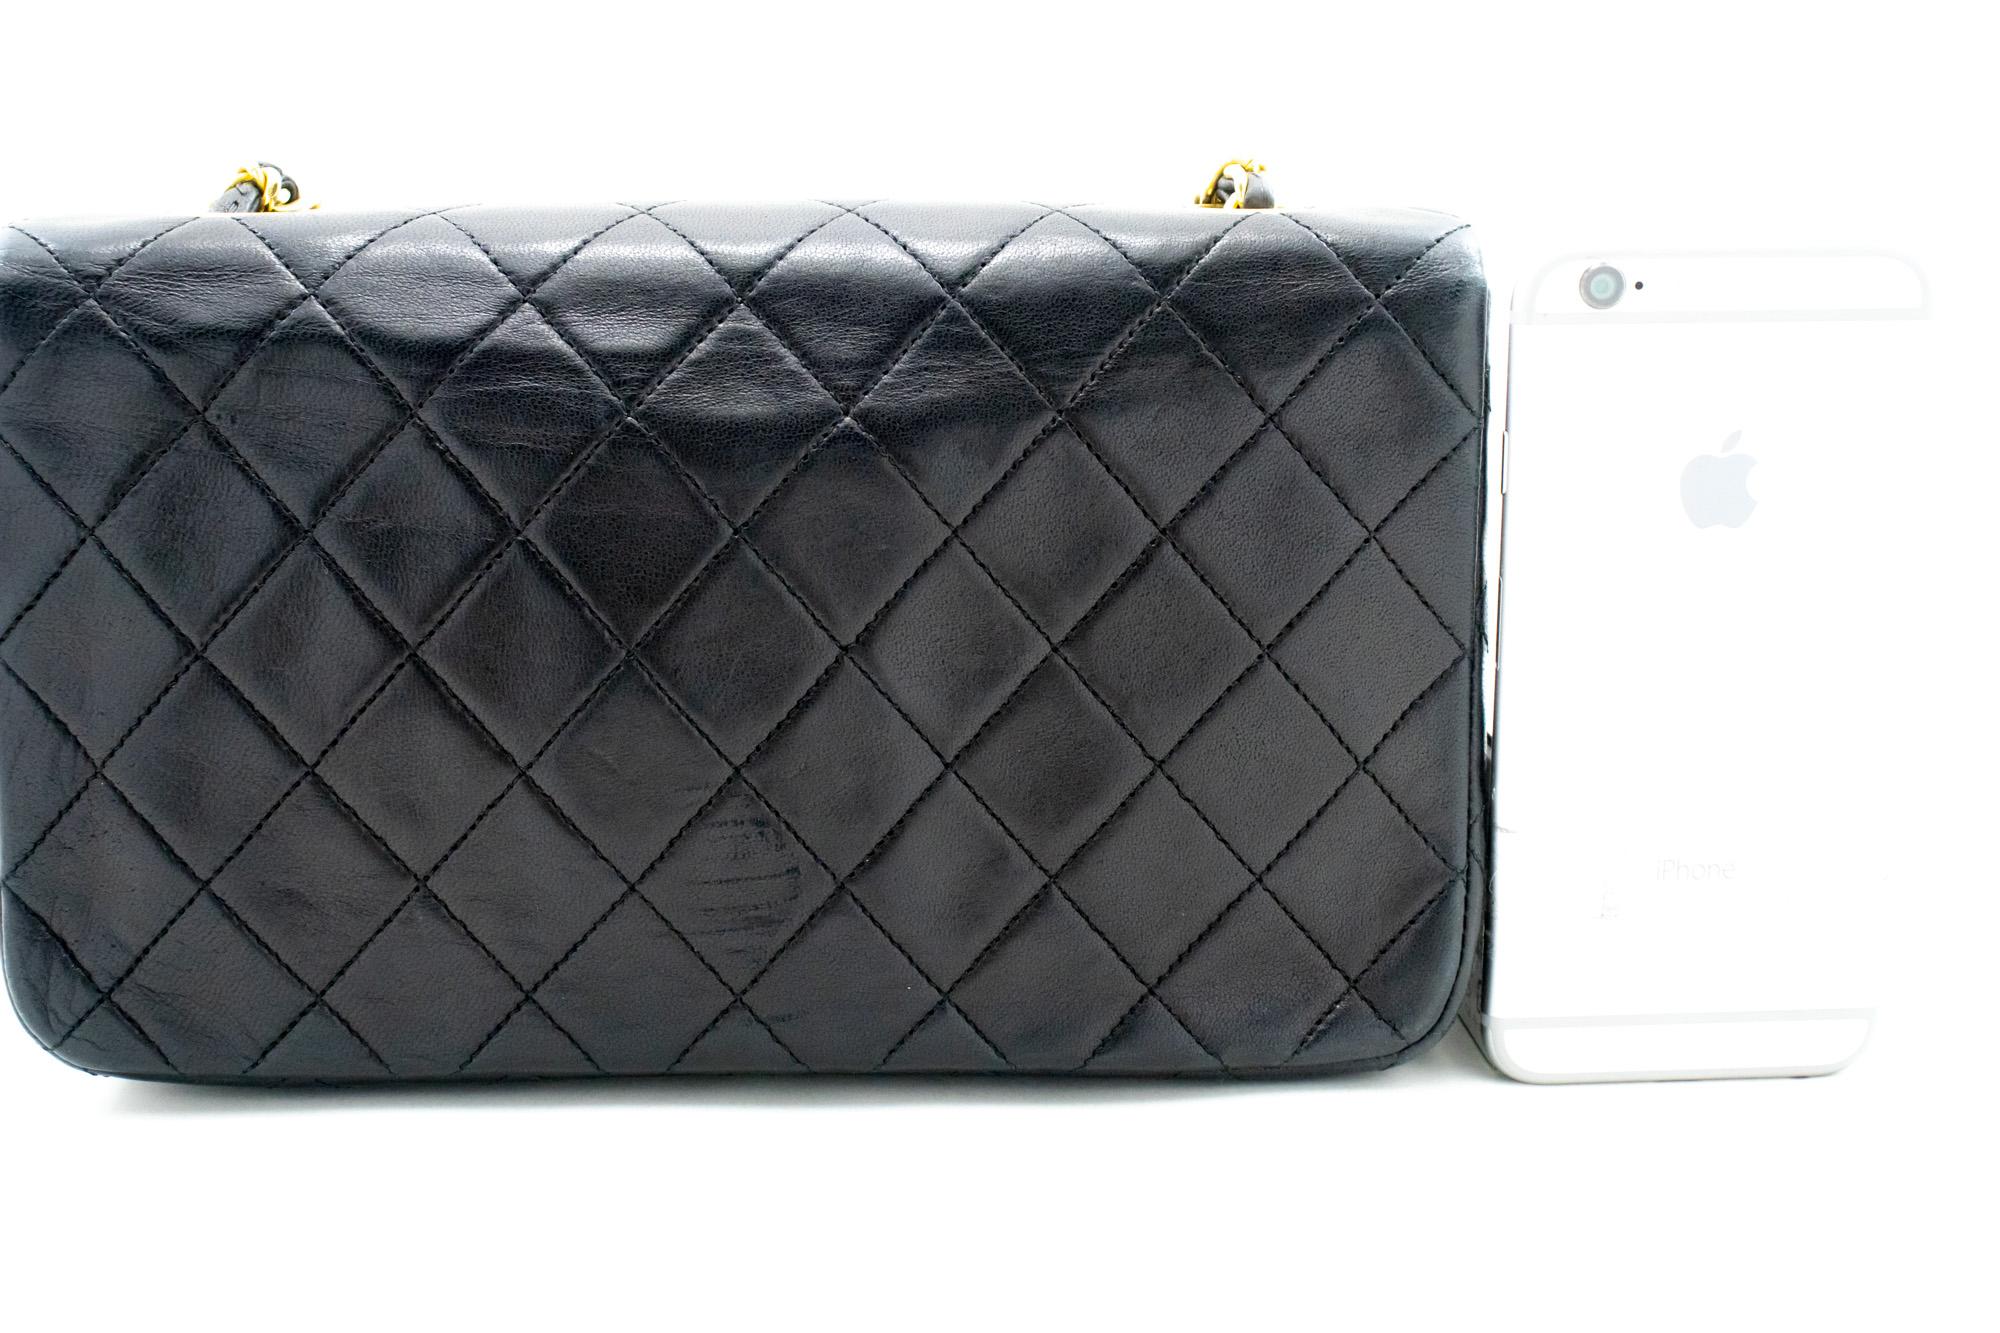 CHANEL Full Chain Flap Shoulder Bag Black Quilted Lambskin In Good Condition For Sale In Takamatsu-shi, JP